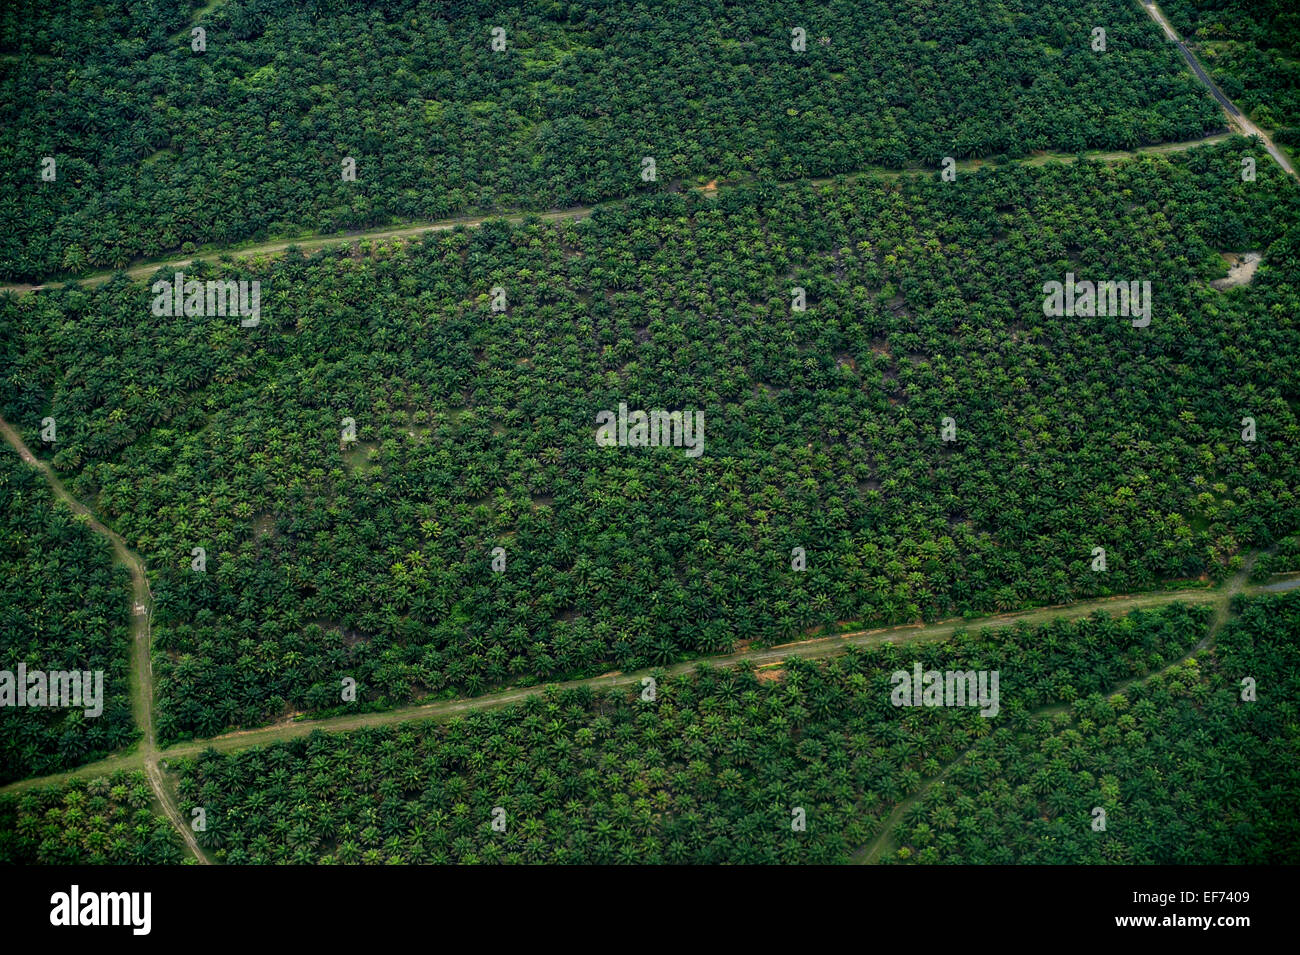 Plantation of oil palms (Elaeis guineensis) for the production of palm oil, aerial view, Simeulue, Indonesia Stock Photo